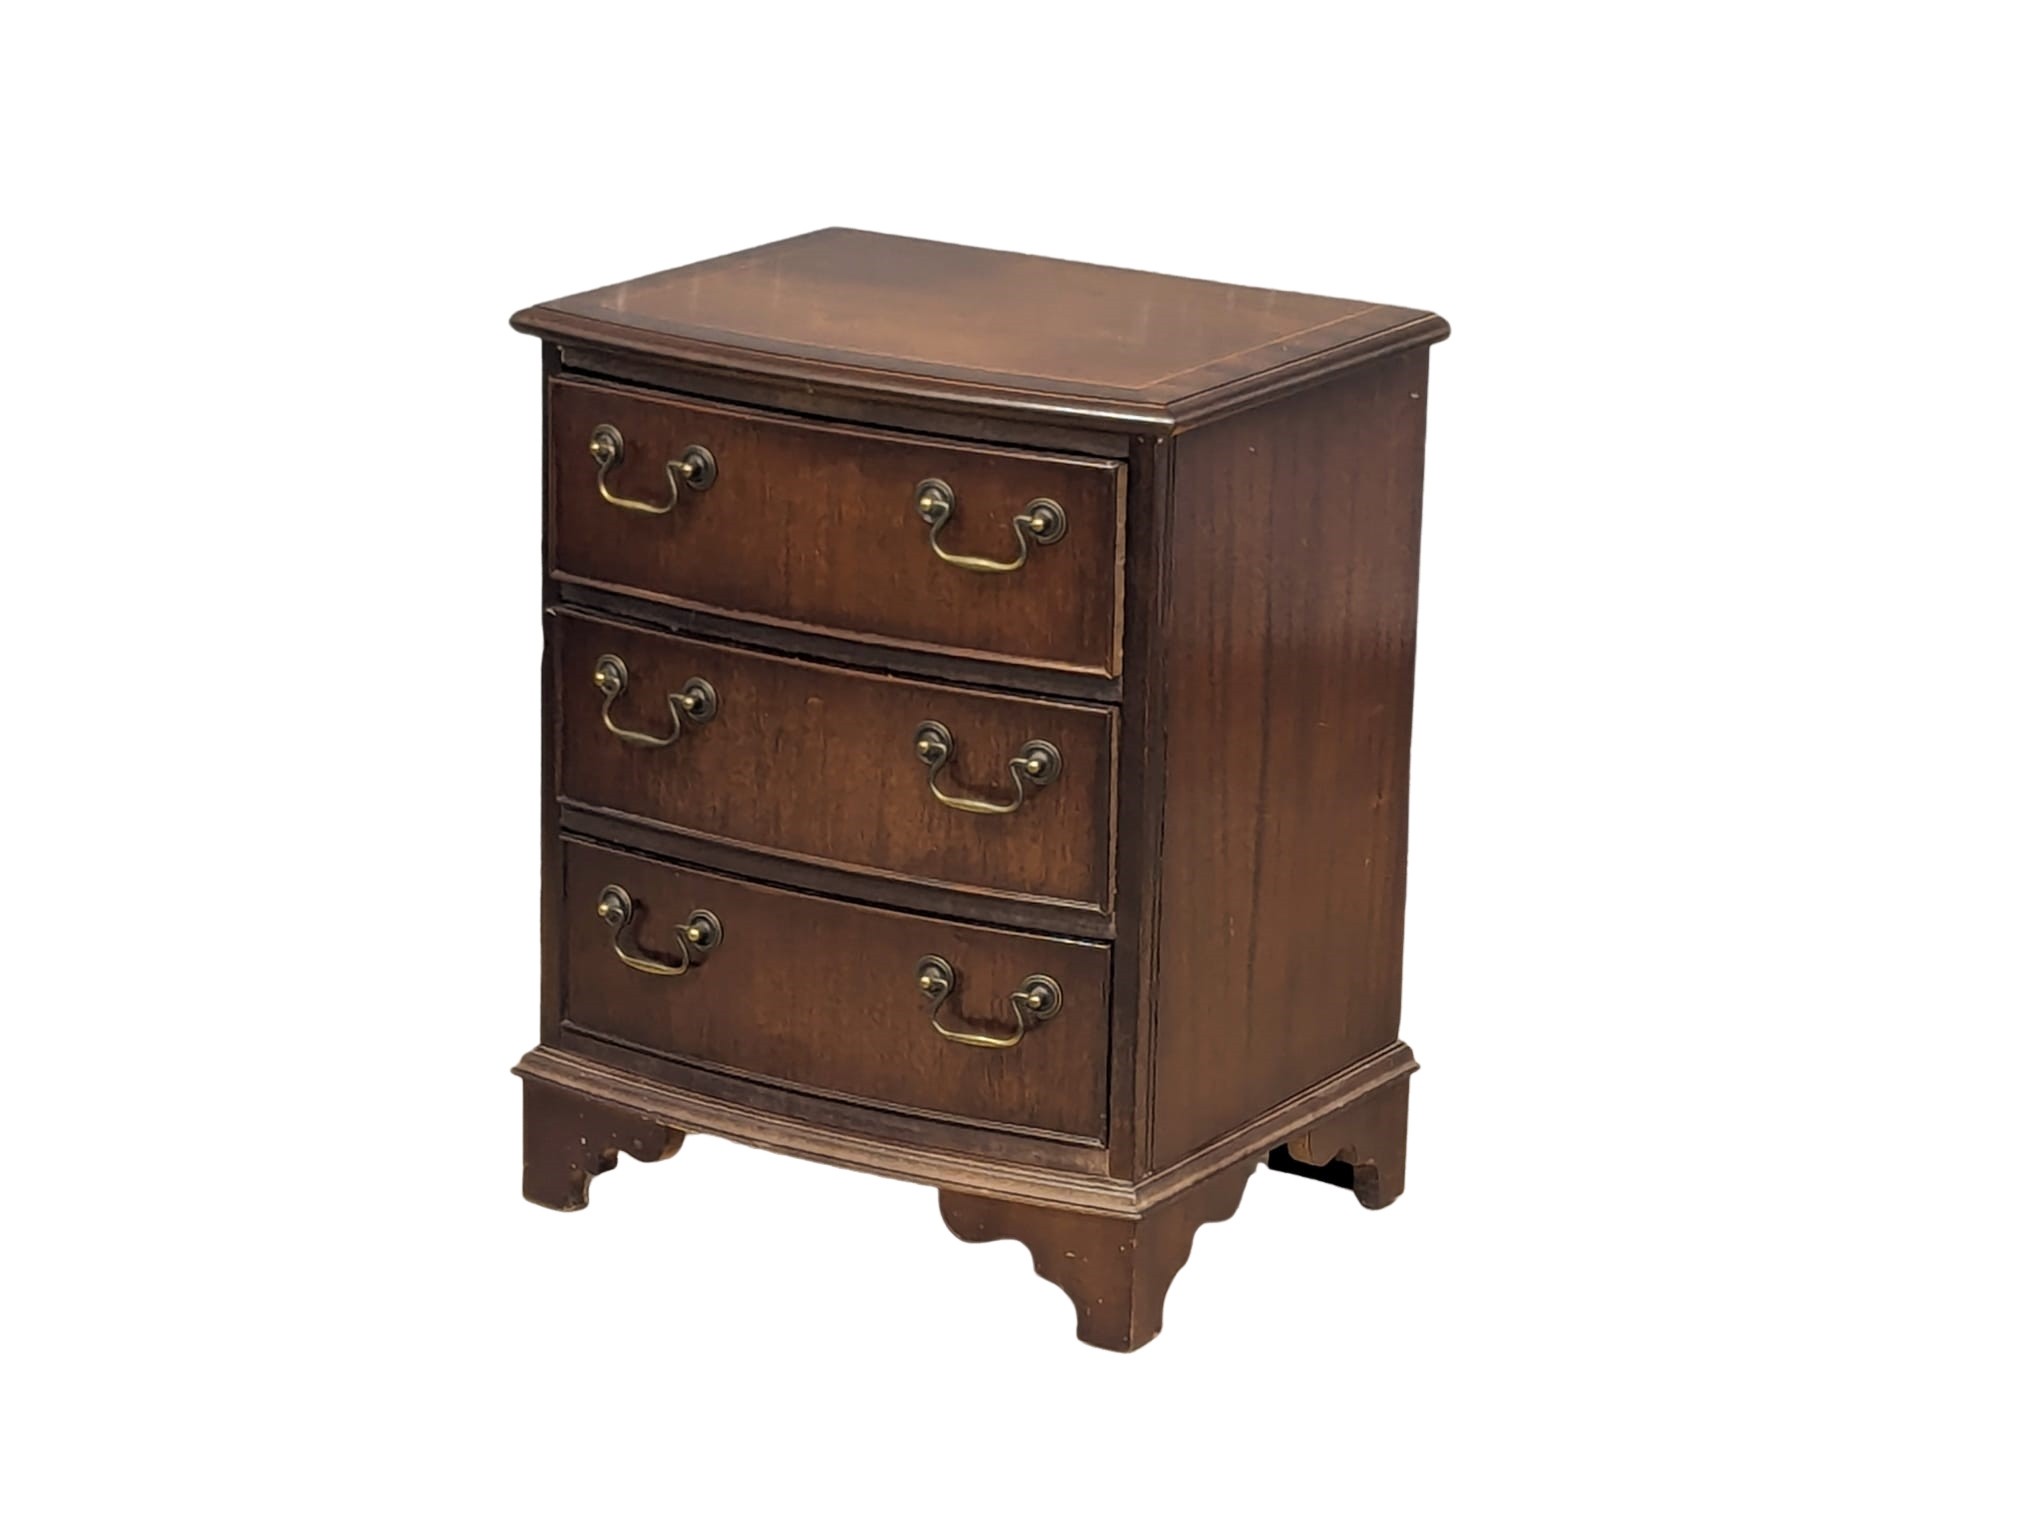 A small Georgian style mahogany bow front chest of drawers. 50.5x39x62cm - Image 2 of 3